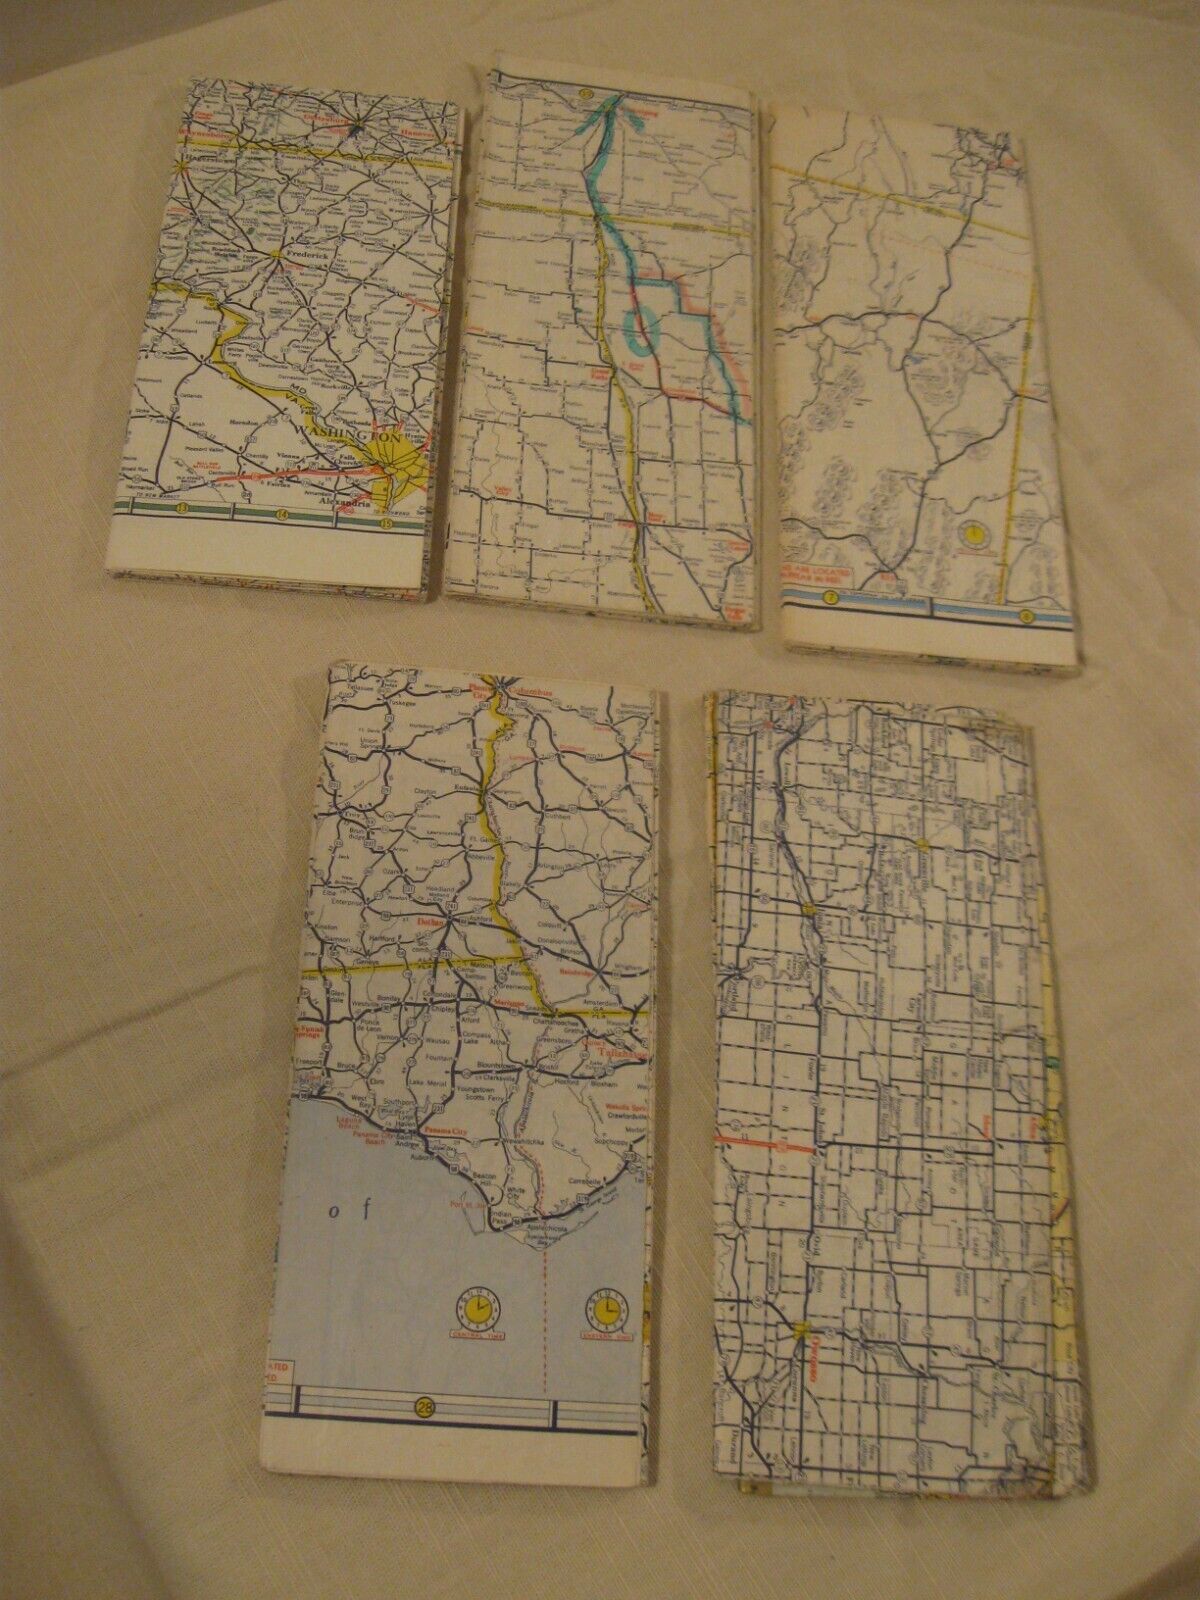 GROUP OF 21 VINTAGE ROAD MAPS OF UNITED STATES